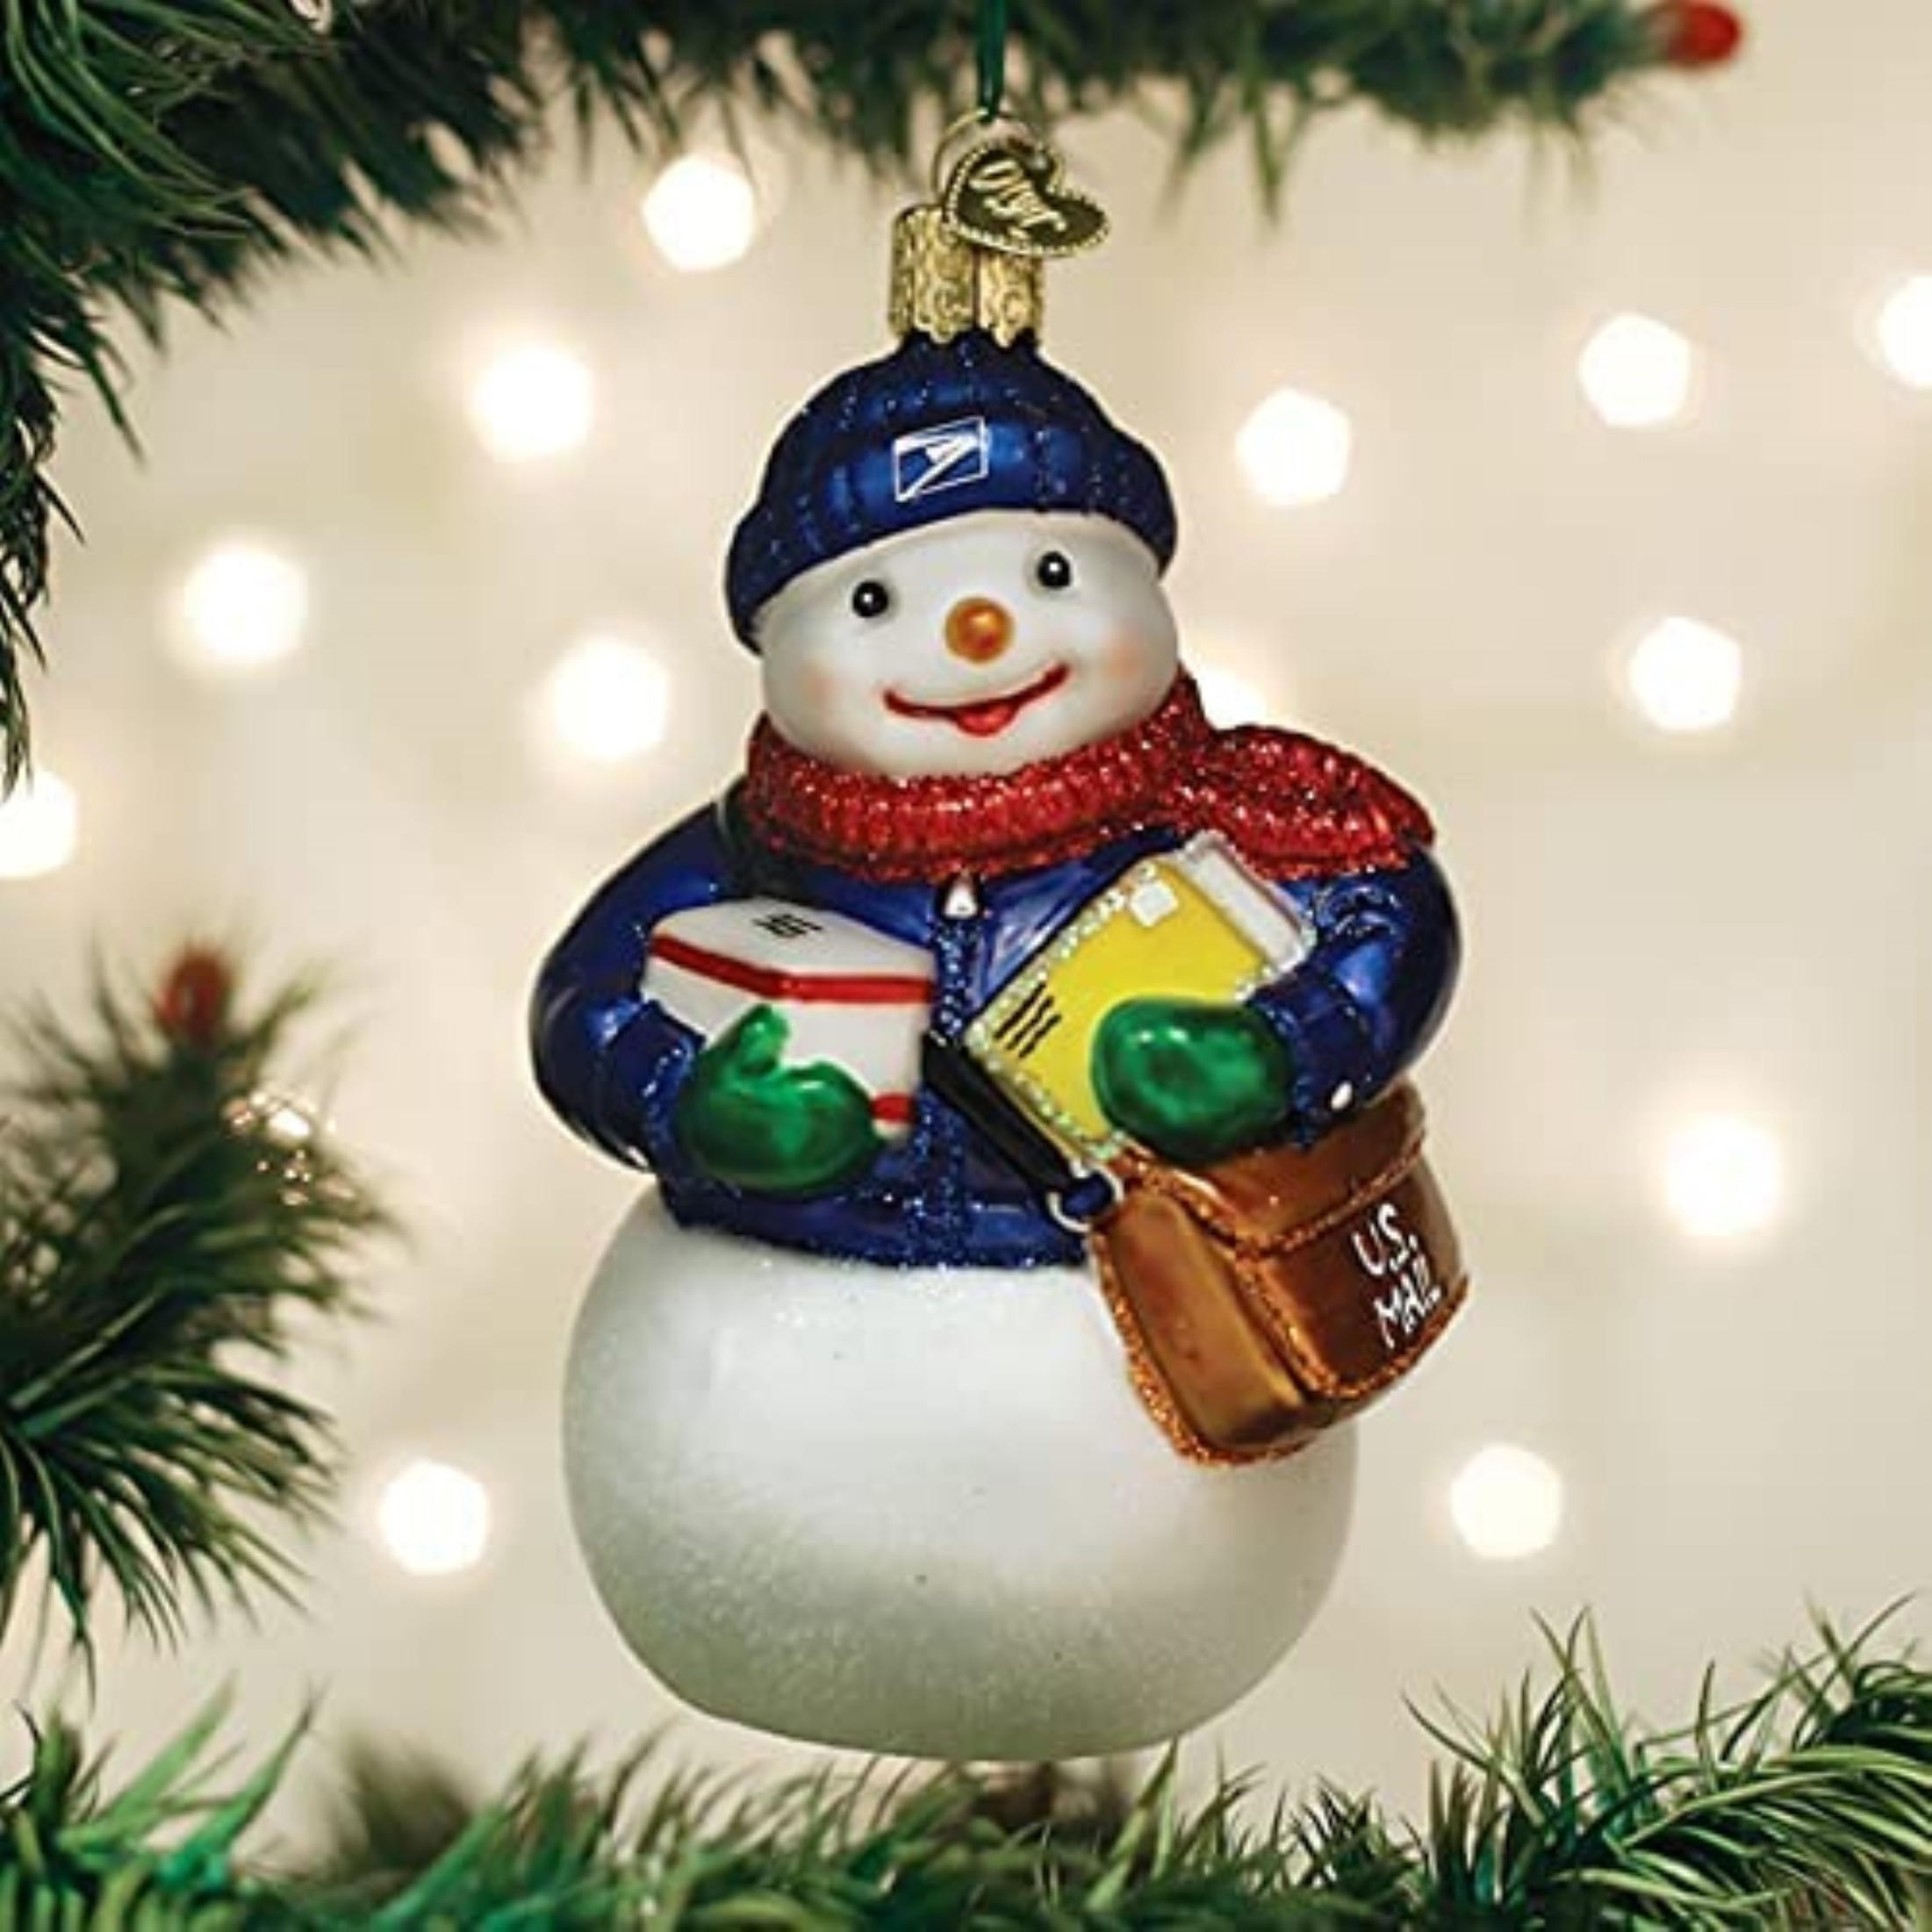 Old World Christmas Glass Blown Christmas Ornament, USPS Snowman (With OWC Gift Box)